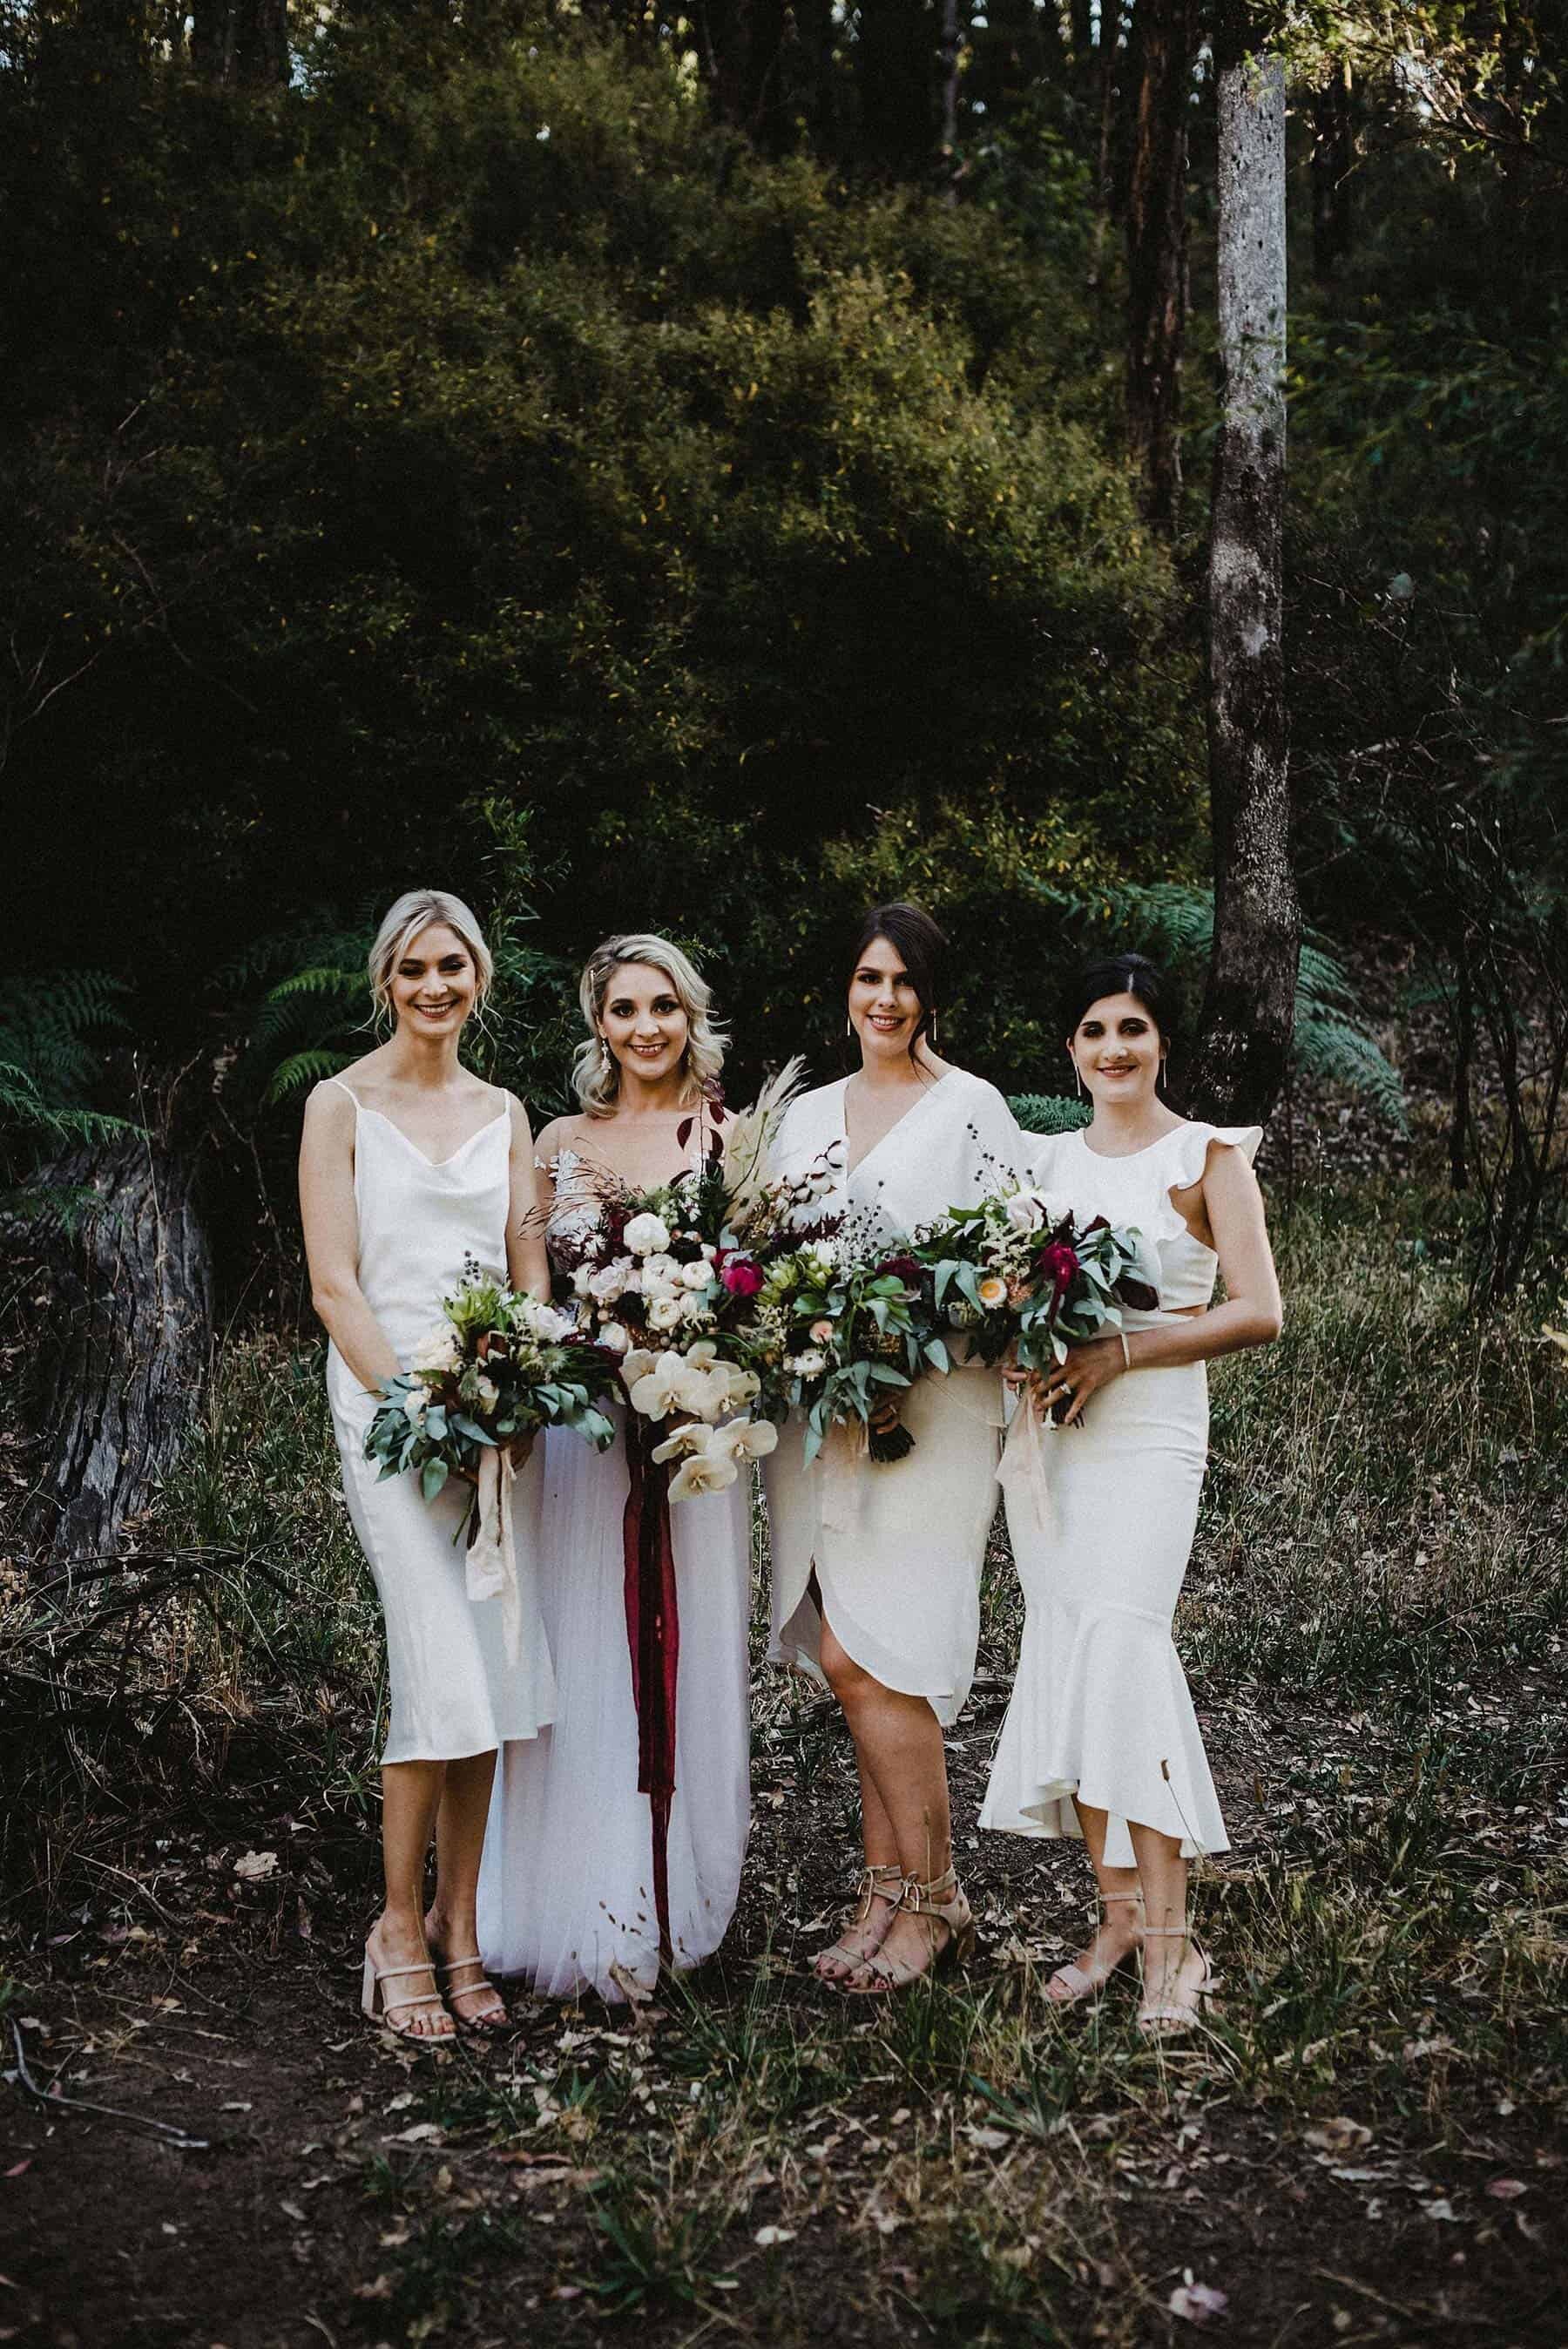 White bridesmaid dresses with native bouquets